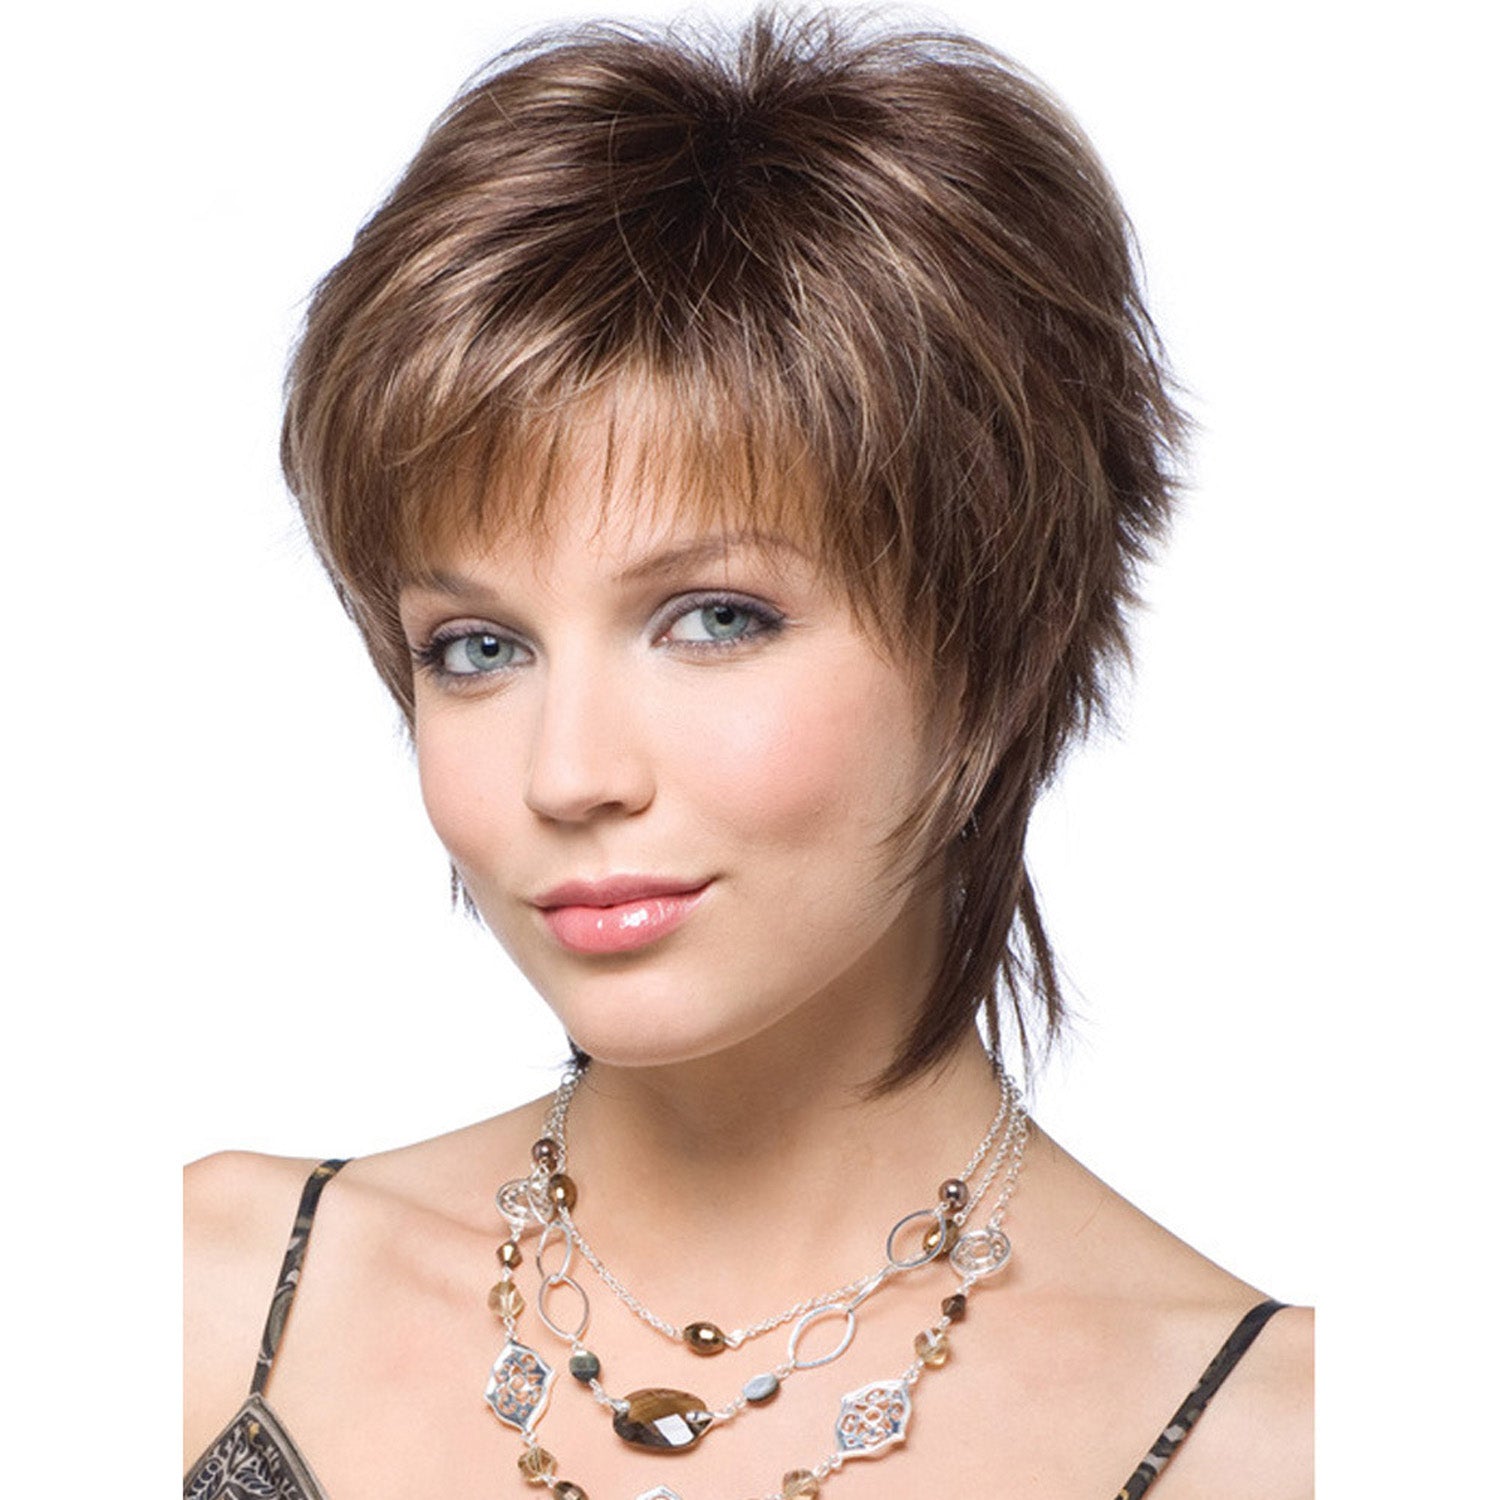 Fairy | Brown Short Pixie Cut Wavy Synthetic Hair Wig